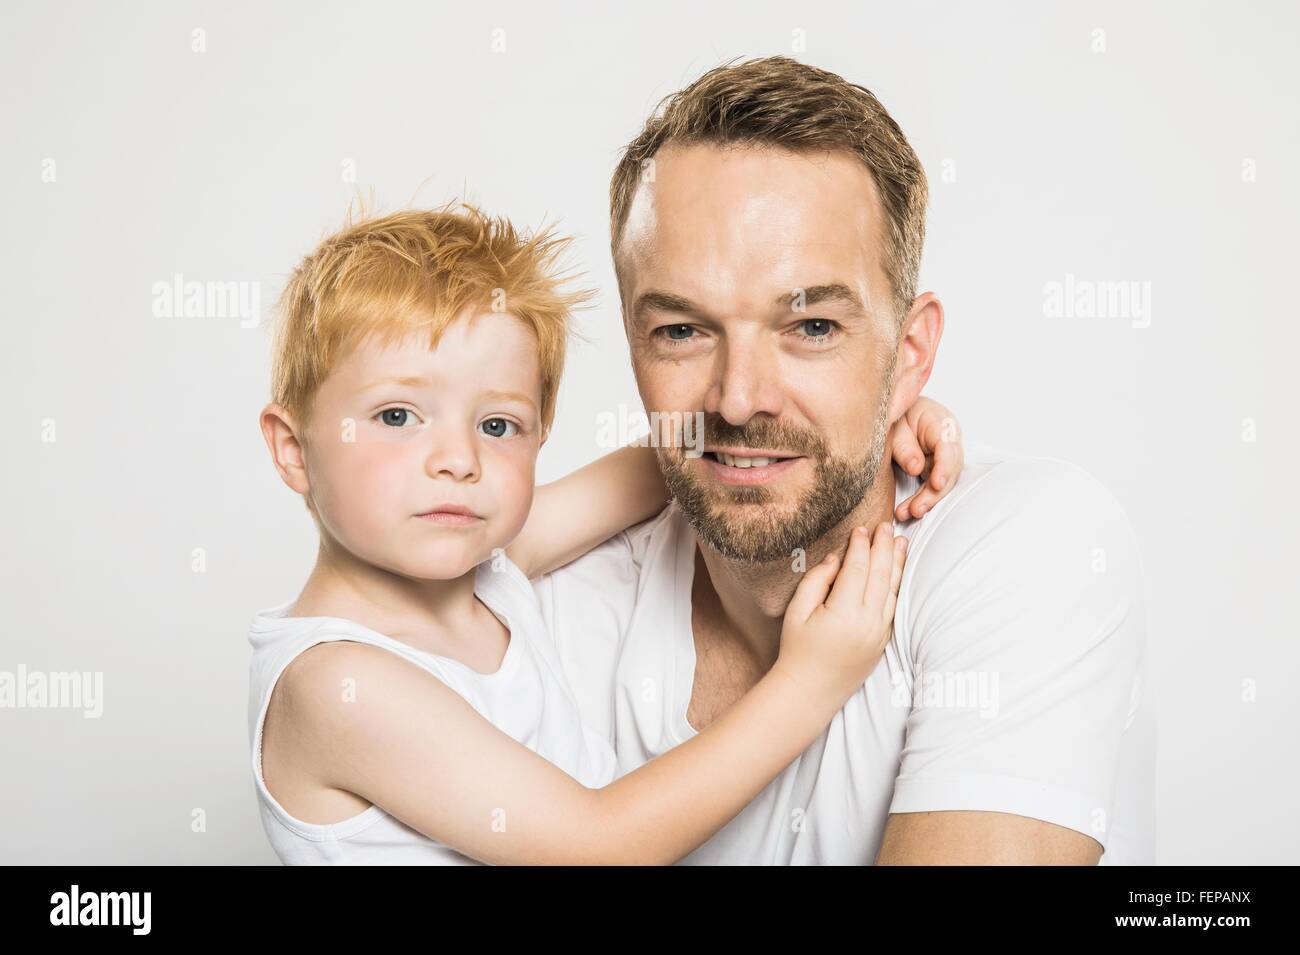 Studio portrait of boy with arms around his father Stock Photo